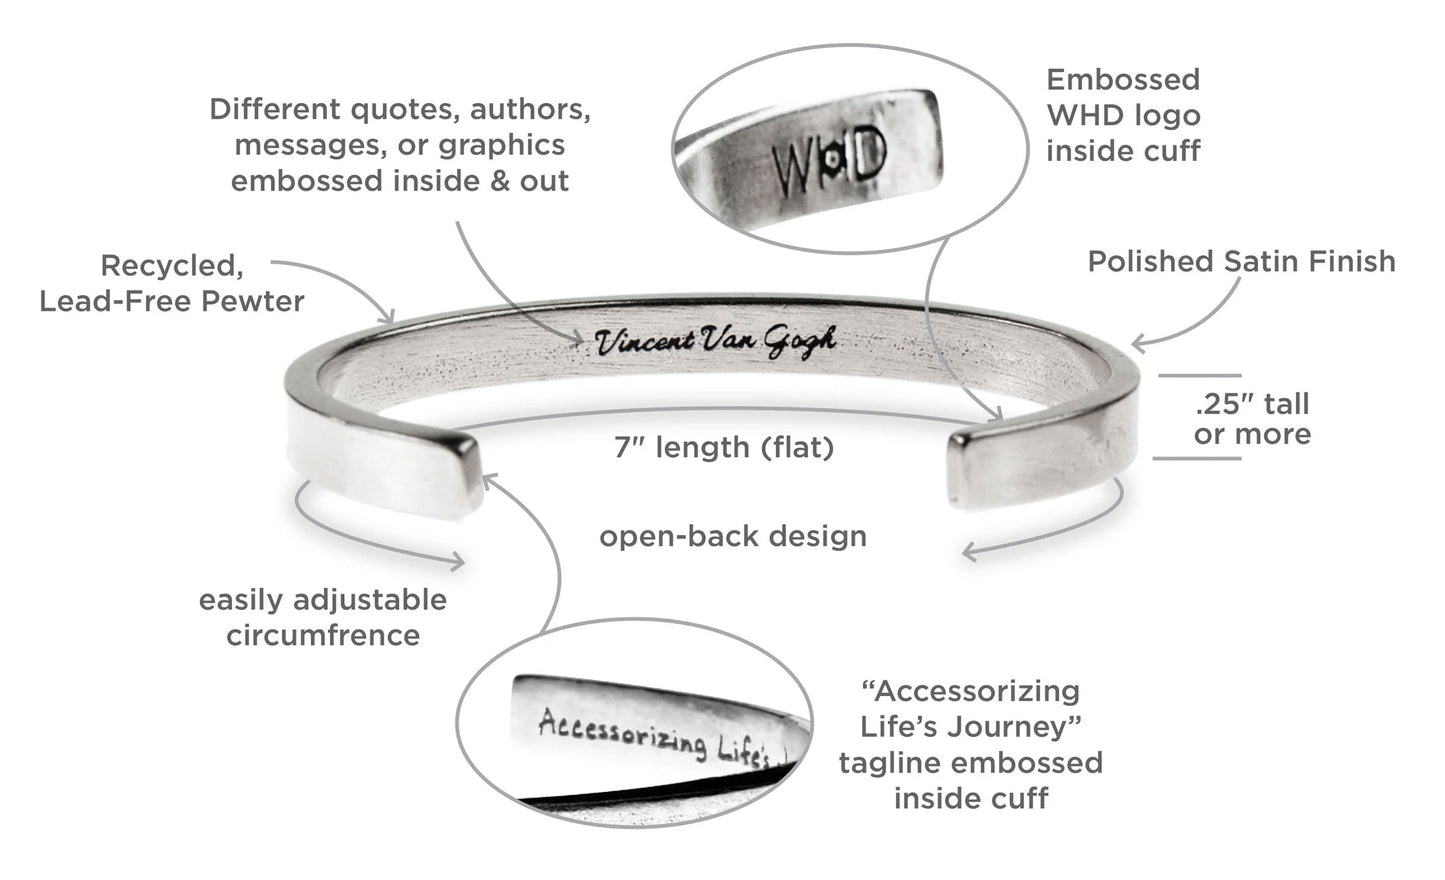 All The World's A Stage Shakespeare Quotable Cuff Bracelet